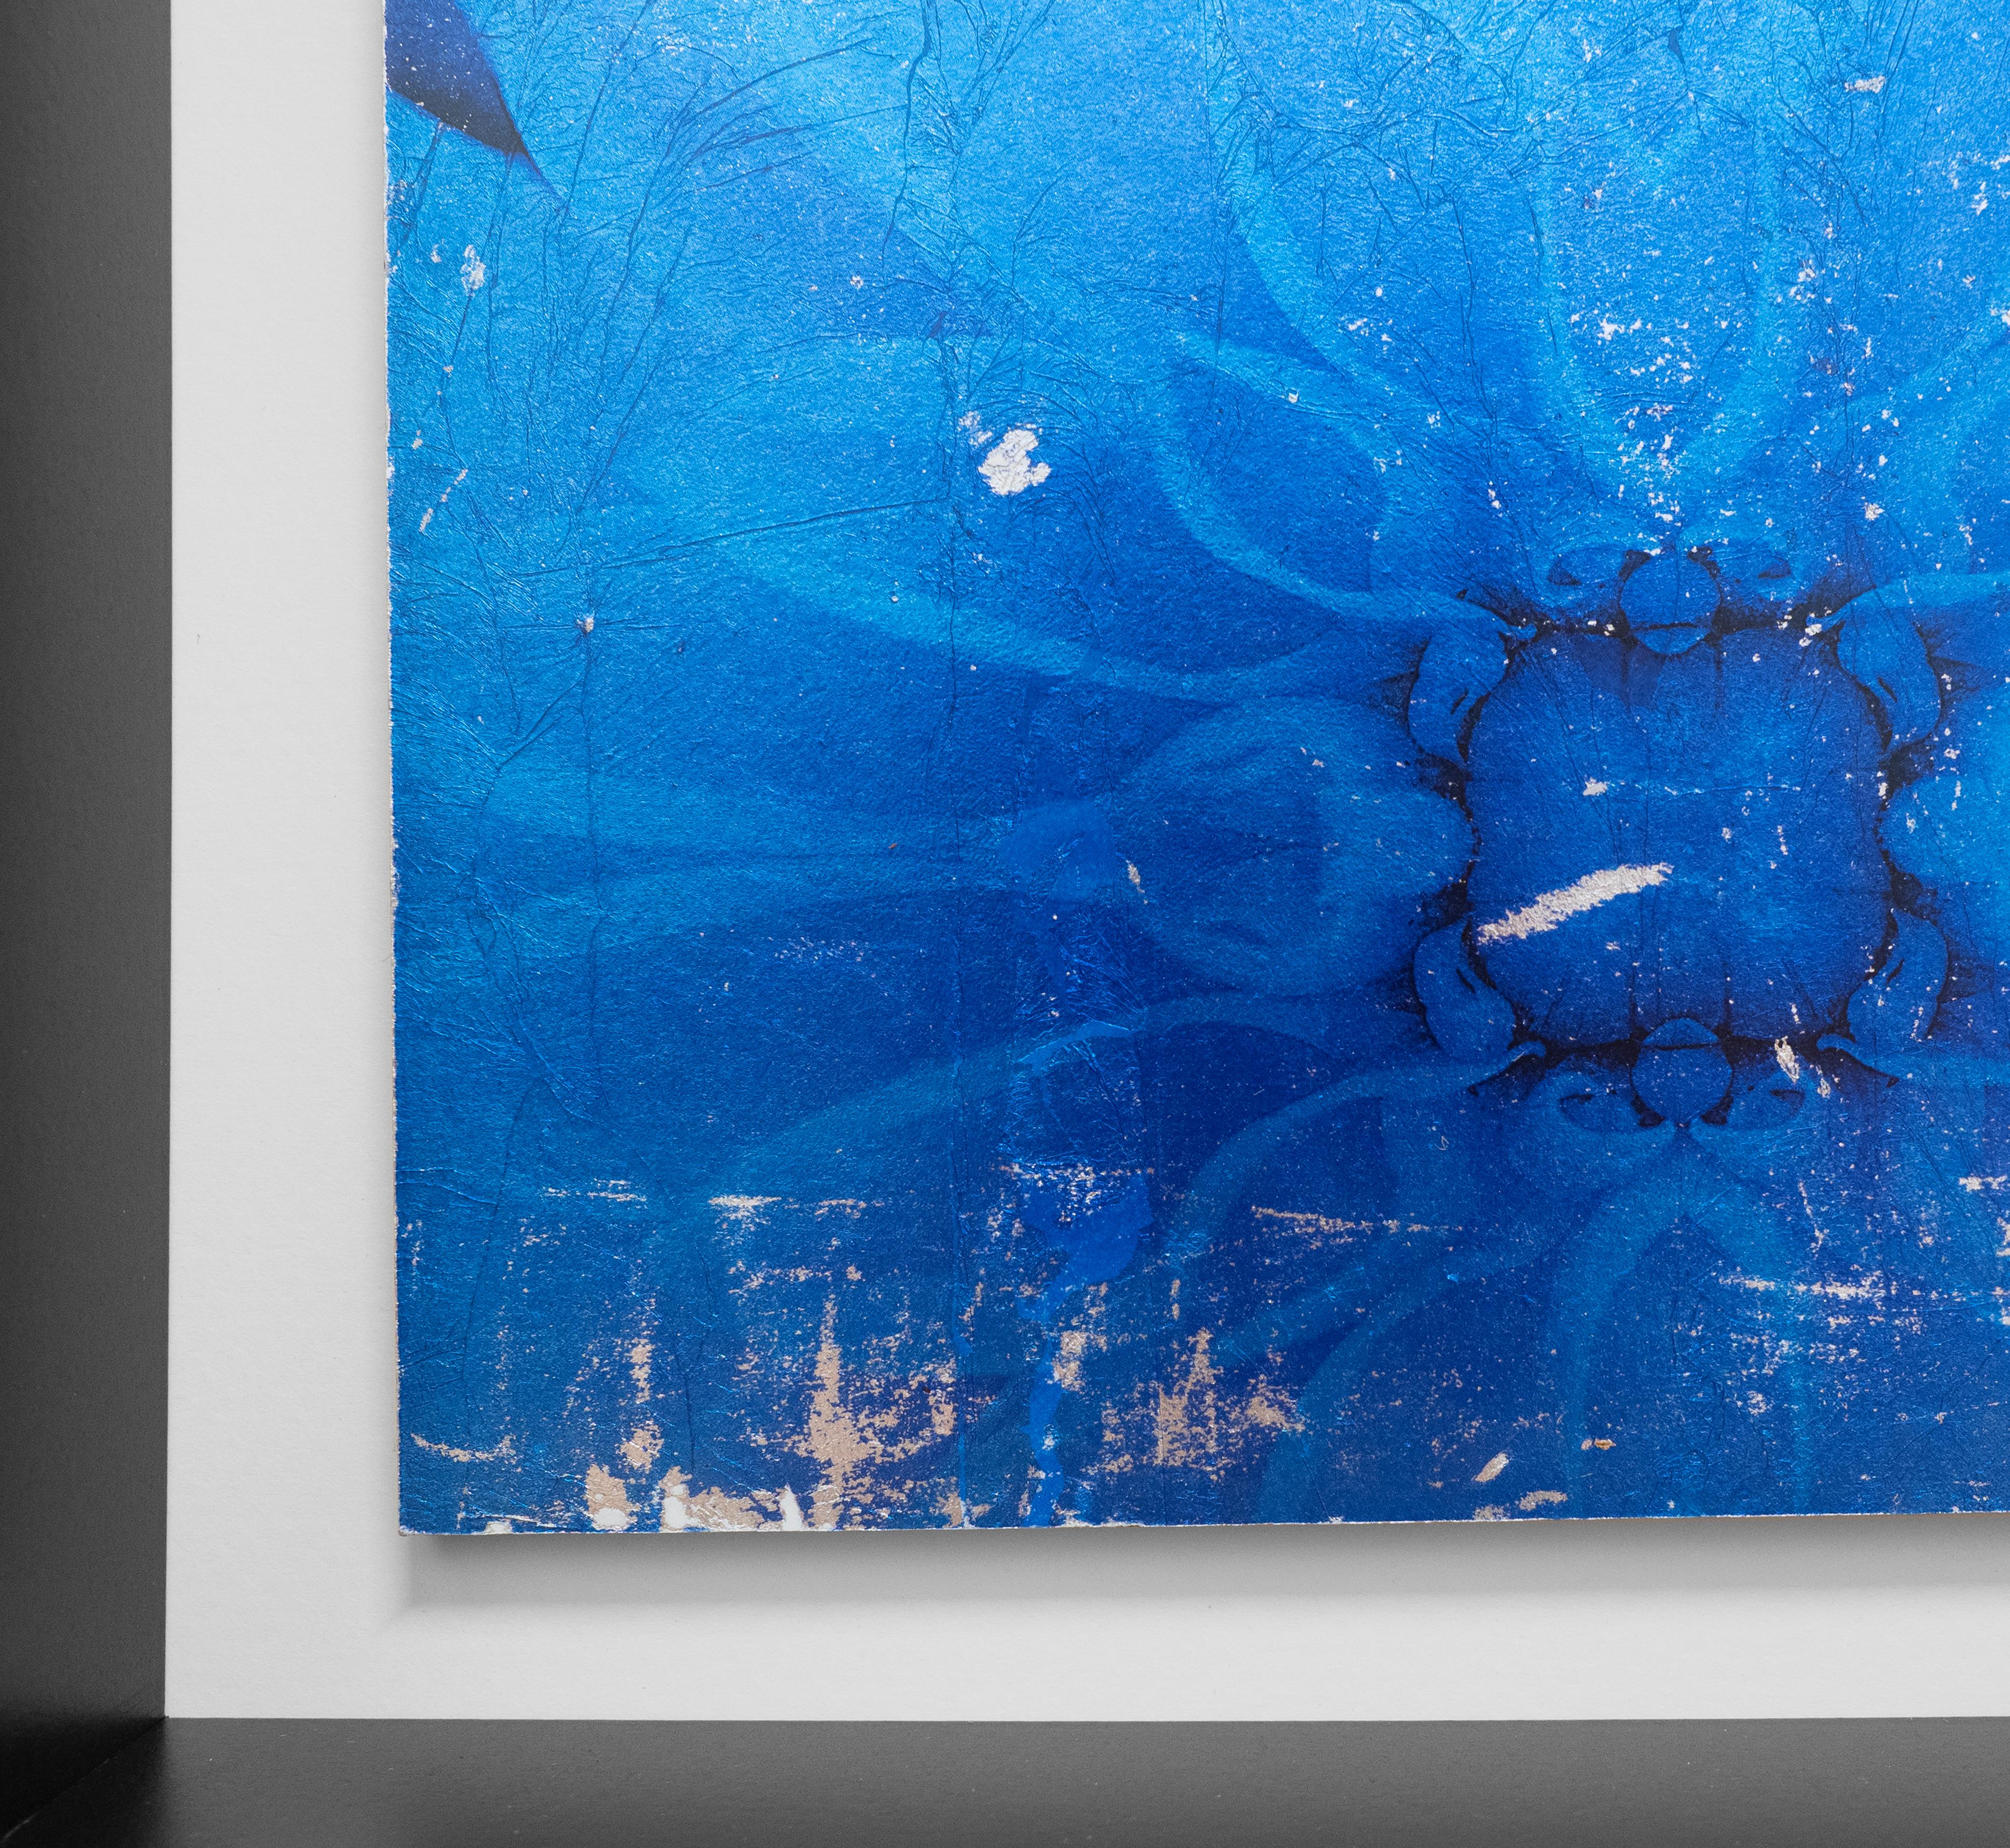 Individual 14 by Mark Jackson is a beautiful framed mixed media piece of a blue flower. Jackson prints his photographs on silver leaf and then adheres the photograph on wood panel.